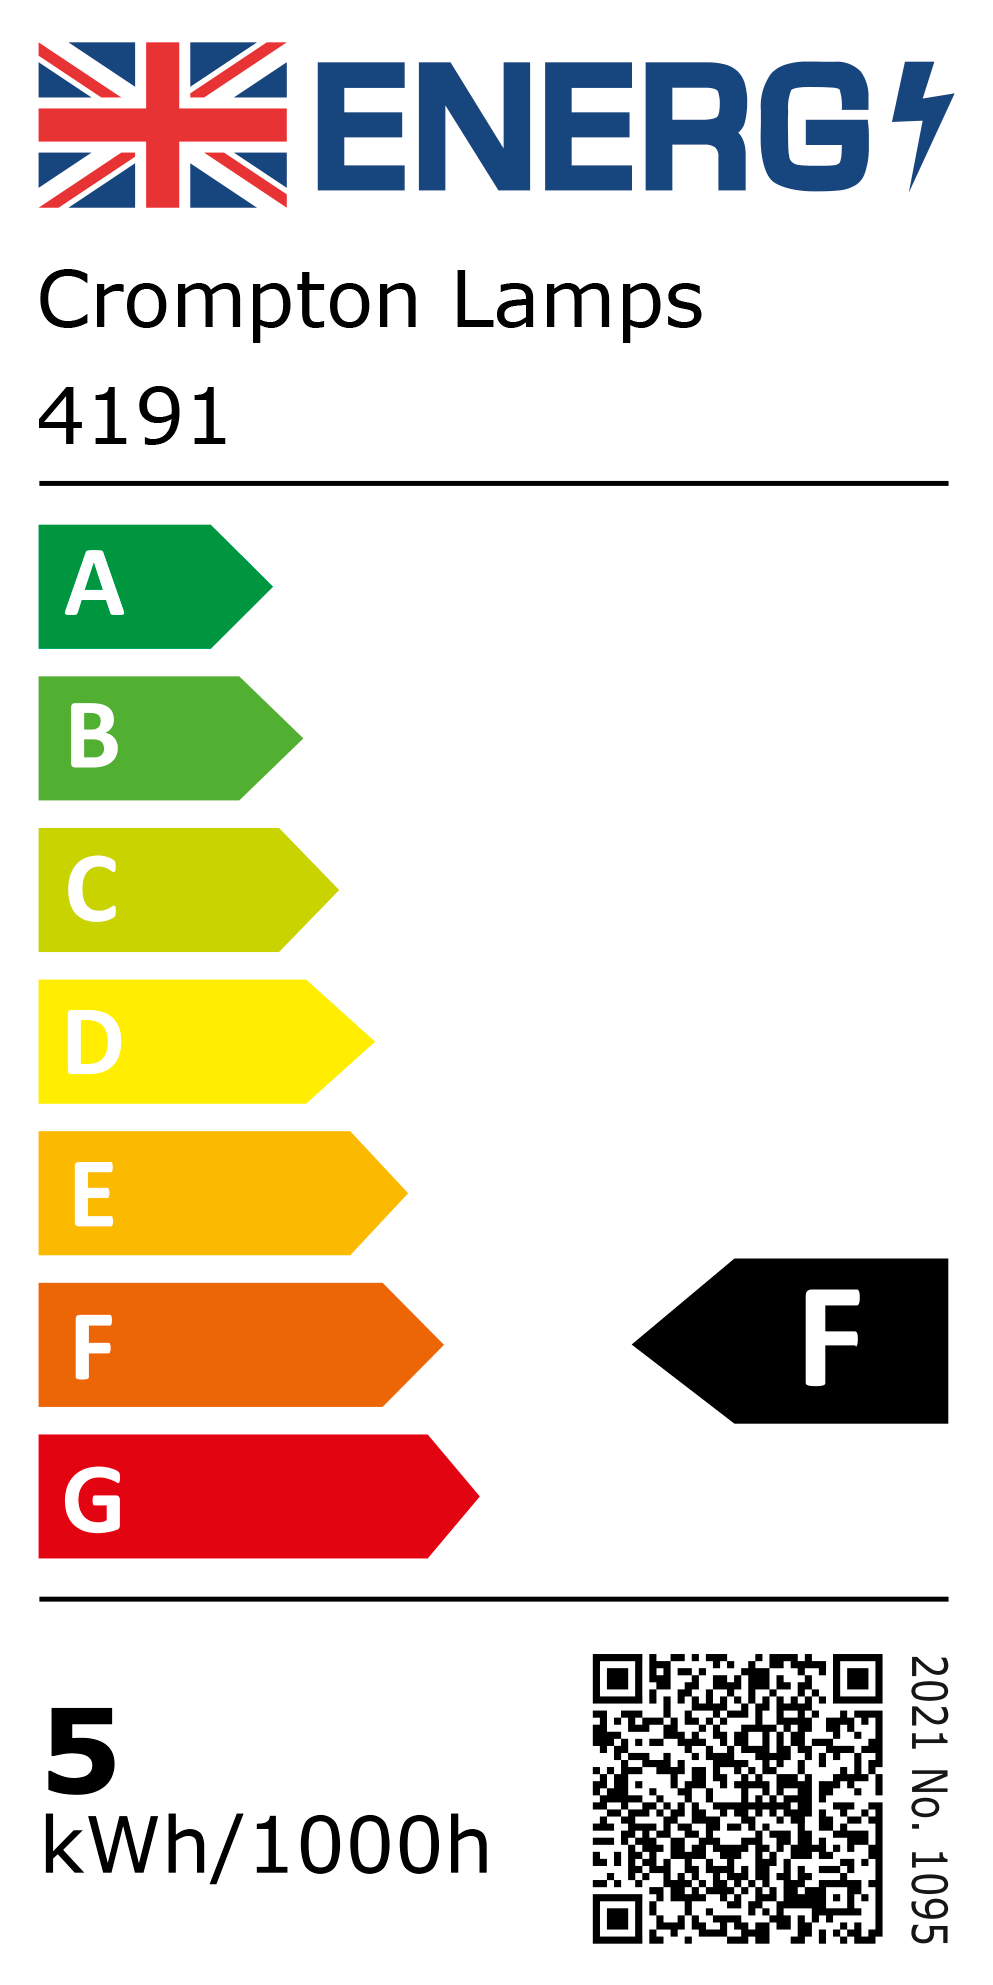 New 2021 Energy Rating Label: Stock Code 4191